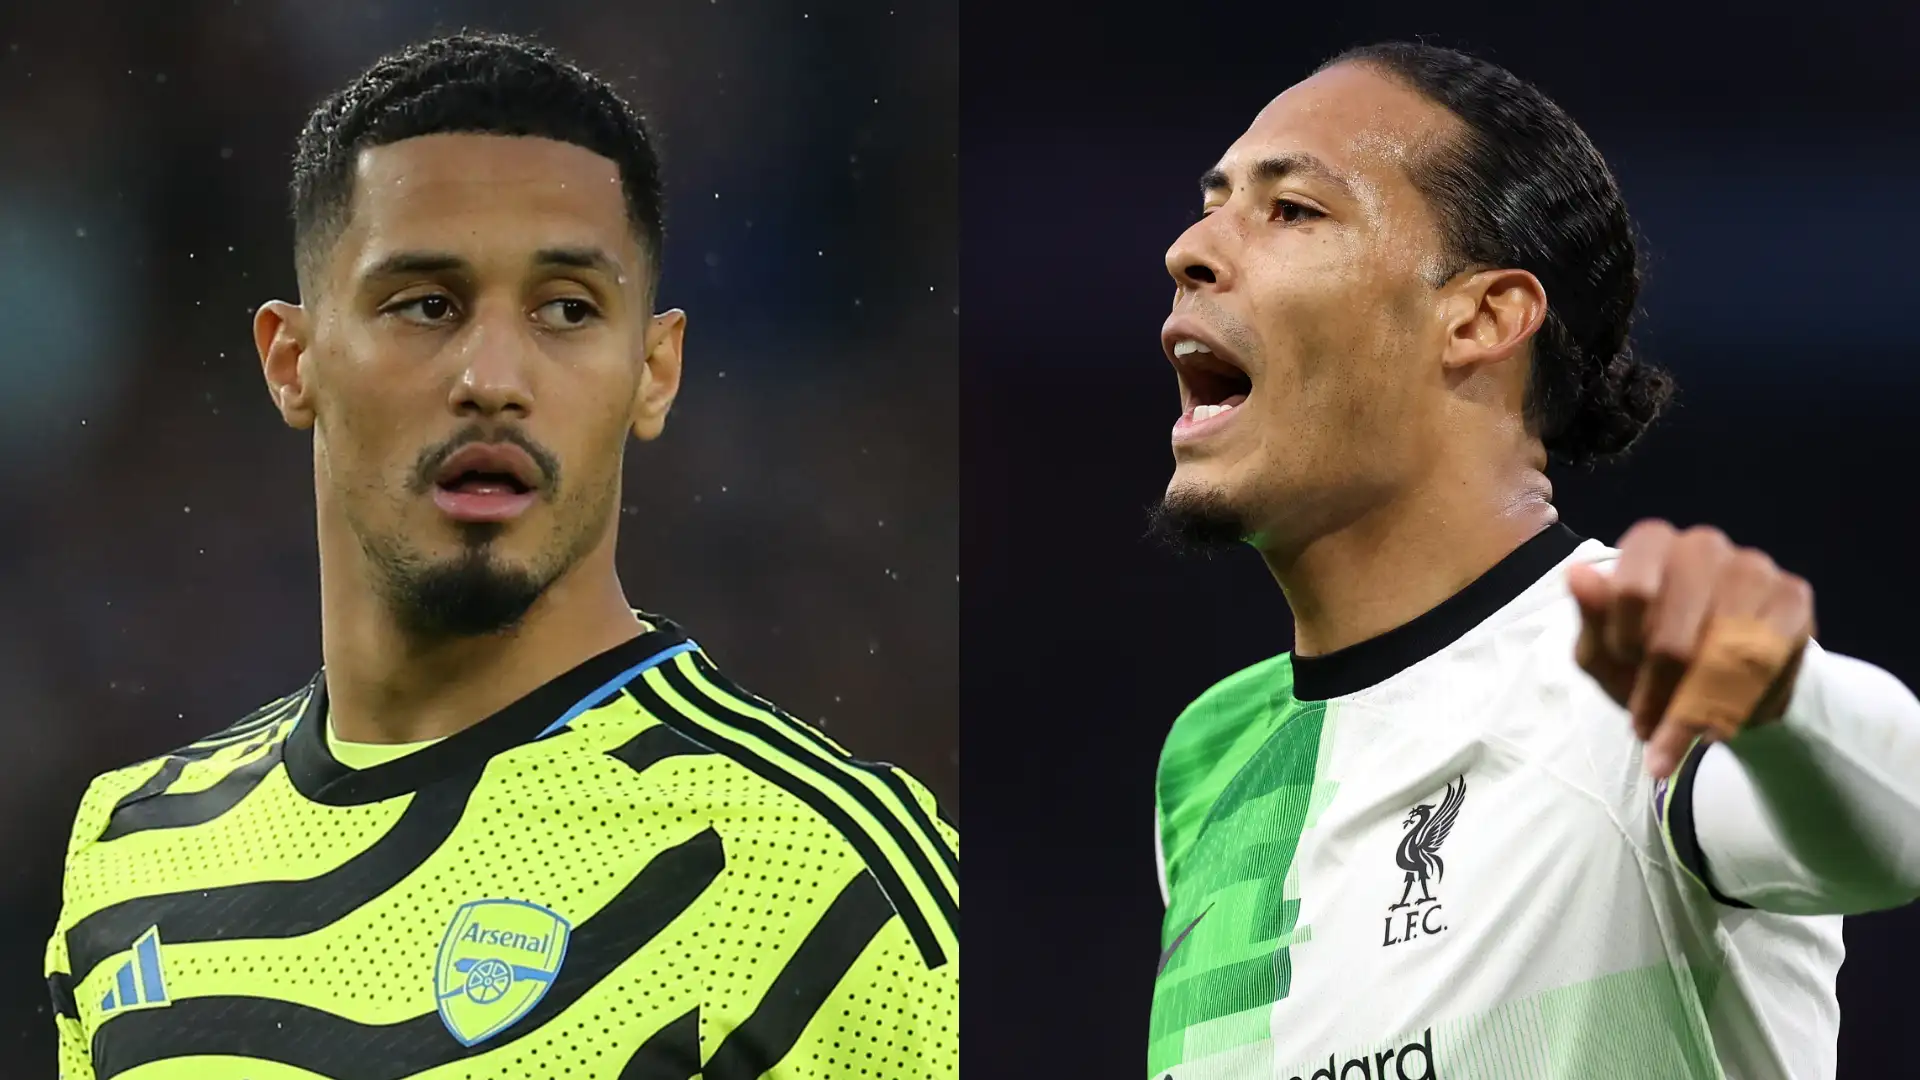 'Virgil van Dijk scares attackers!' - William Saliba wowed by Liverpool defender's 'aura' as Arsenal star feels he is developing similar fear factor